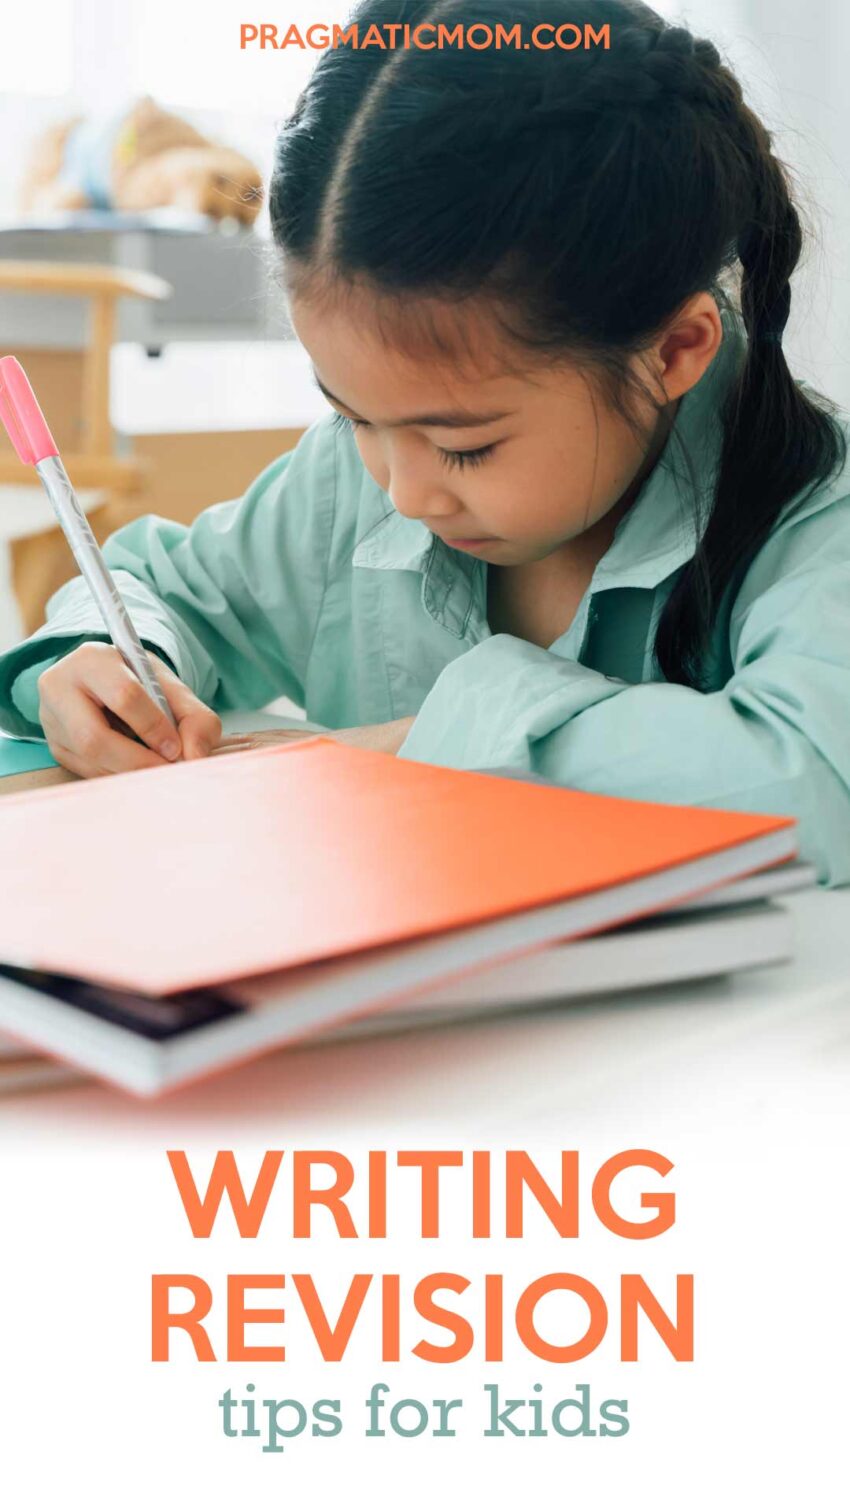 Writing Revision Tips for Kids